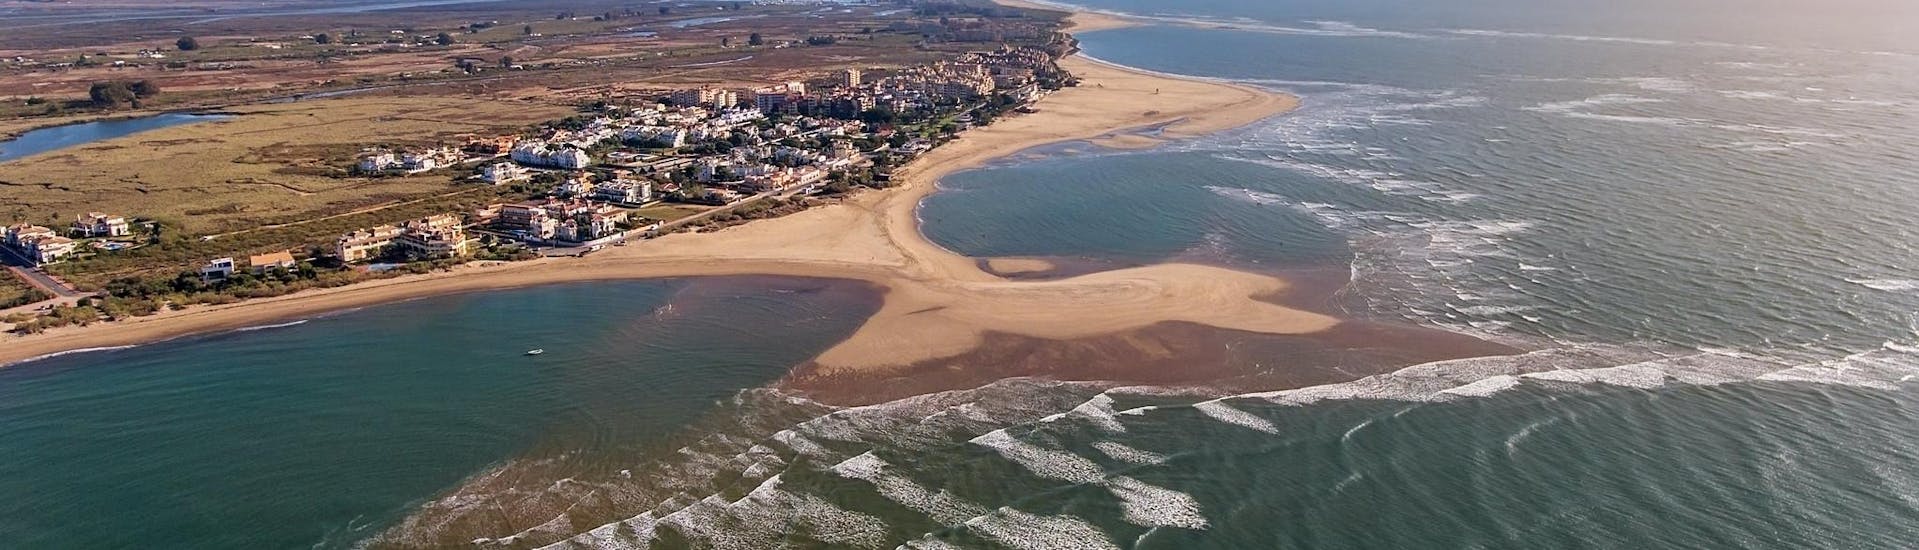 Aerial view of Isla Canela, a wonderful location that you can discover with a boat trip.